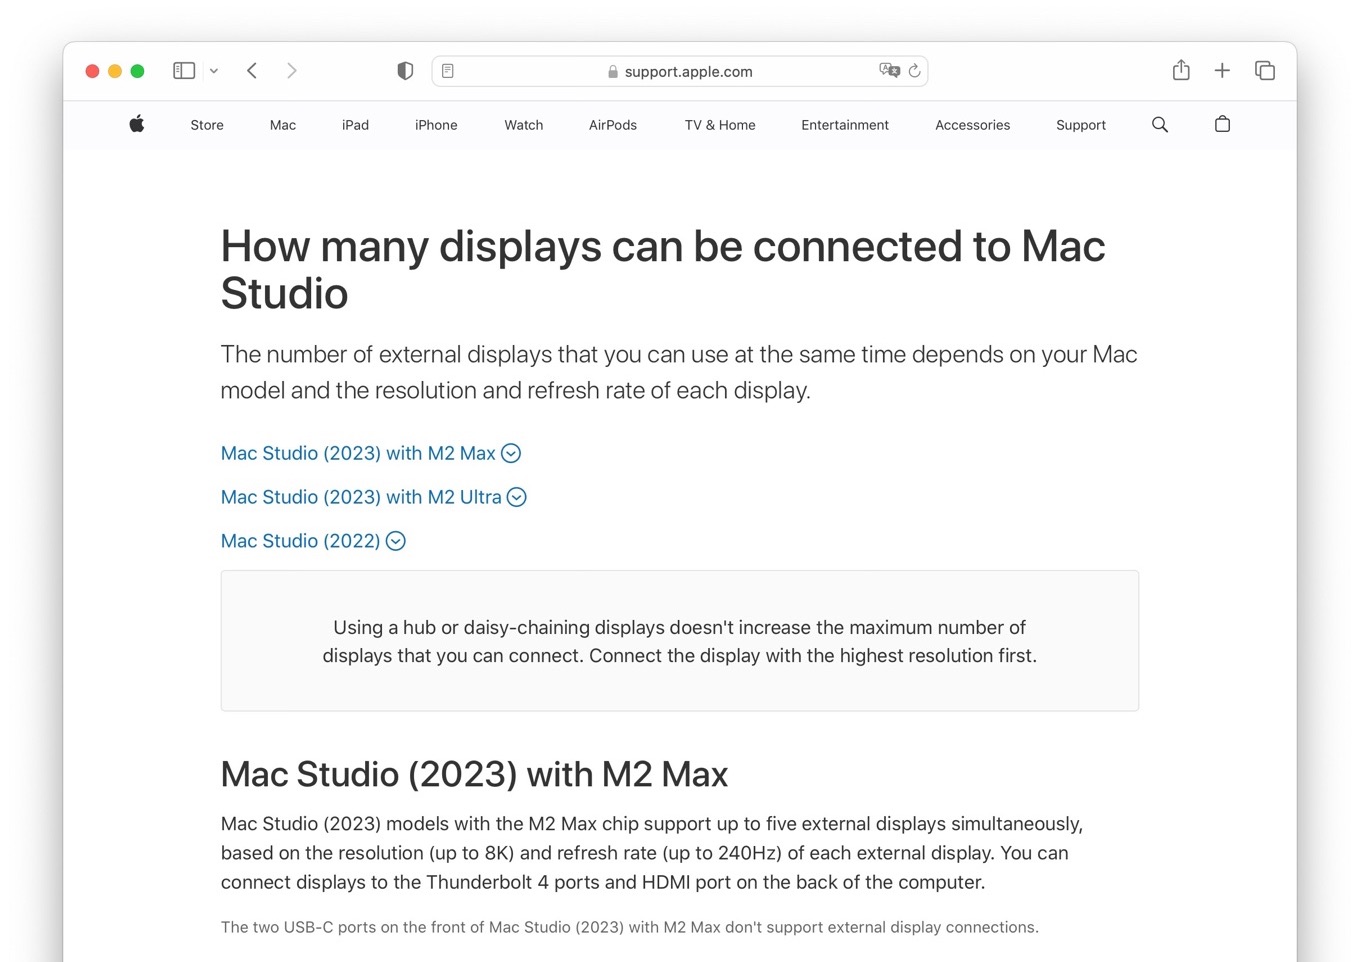 How many displays can be connected to Mac Studio